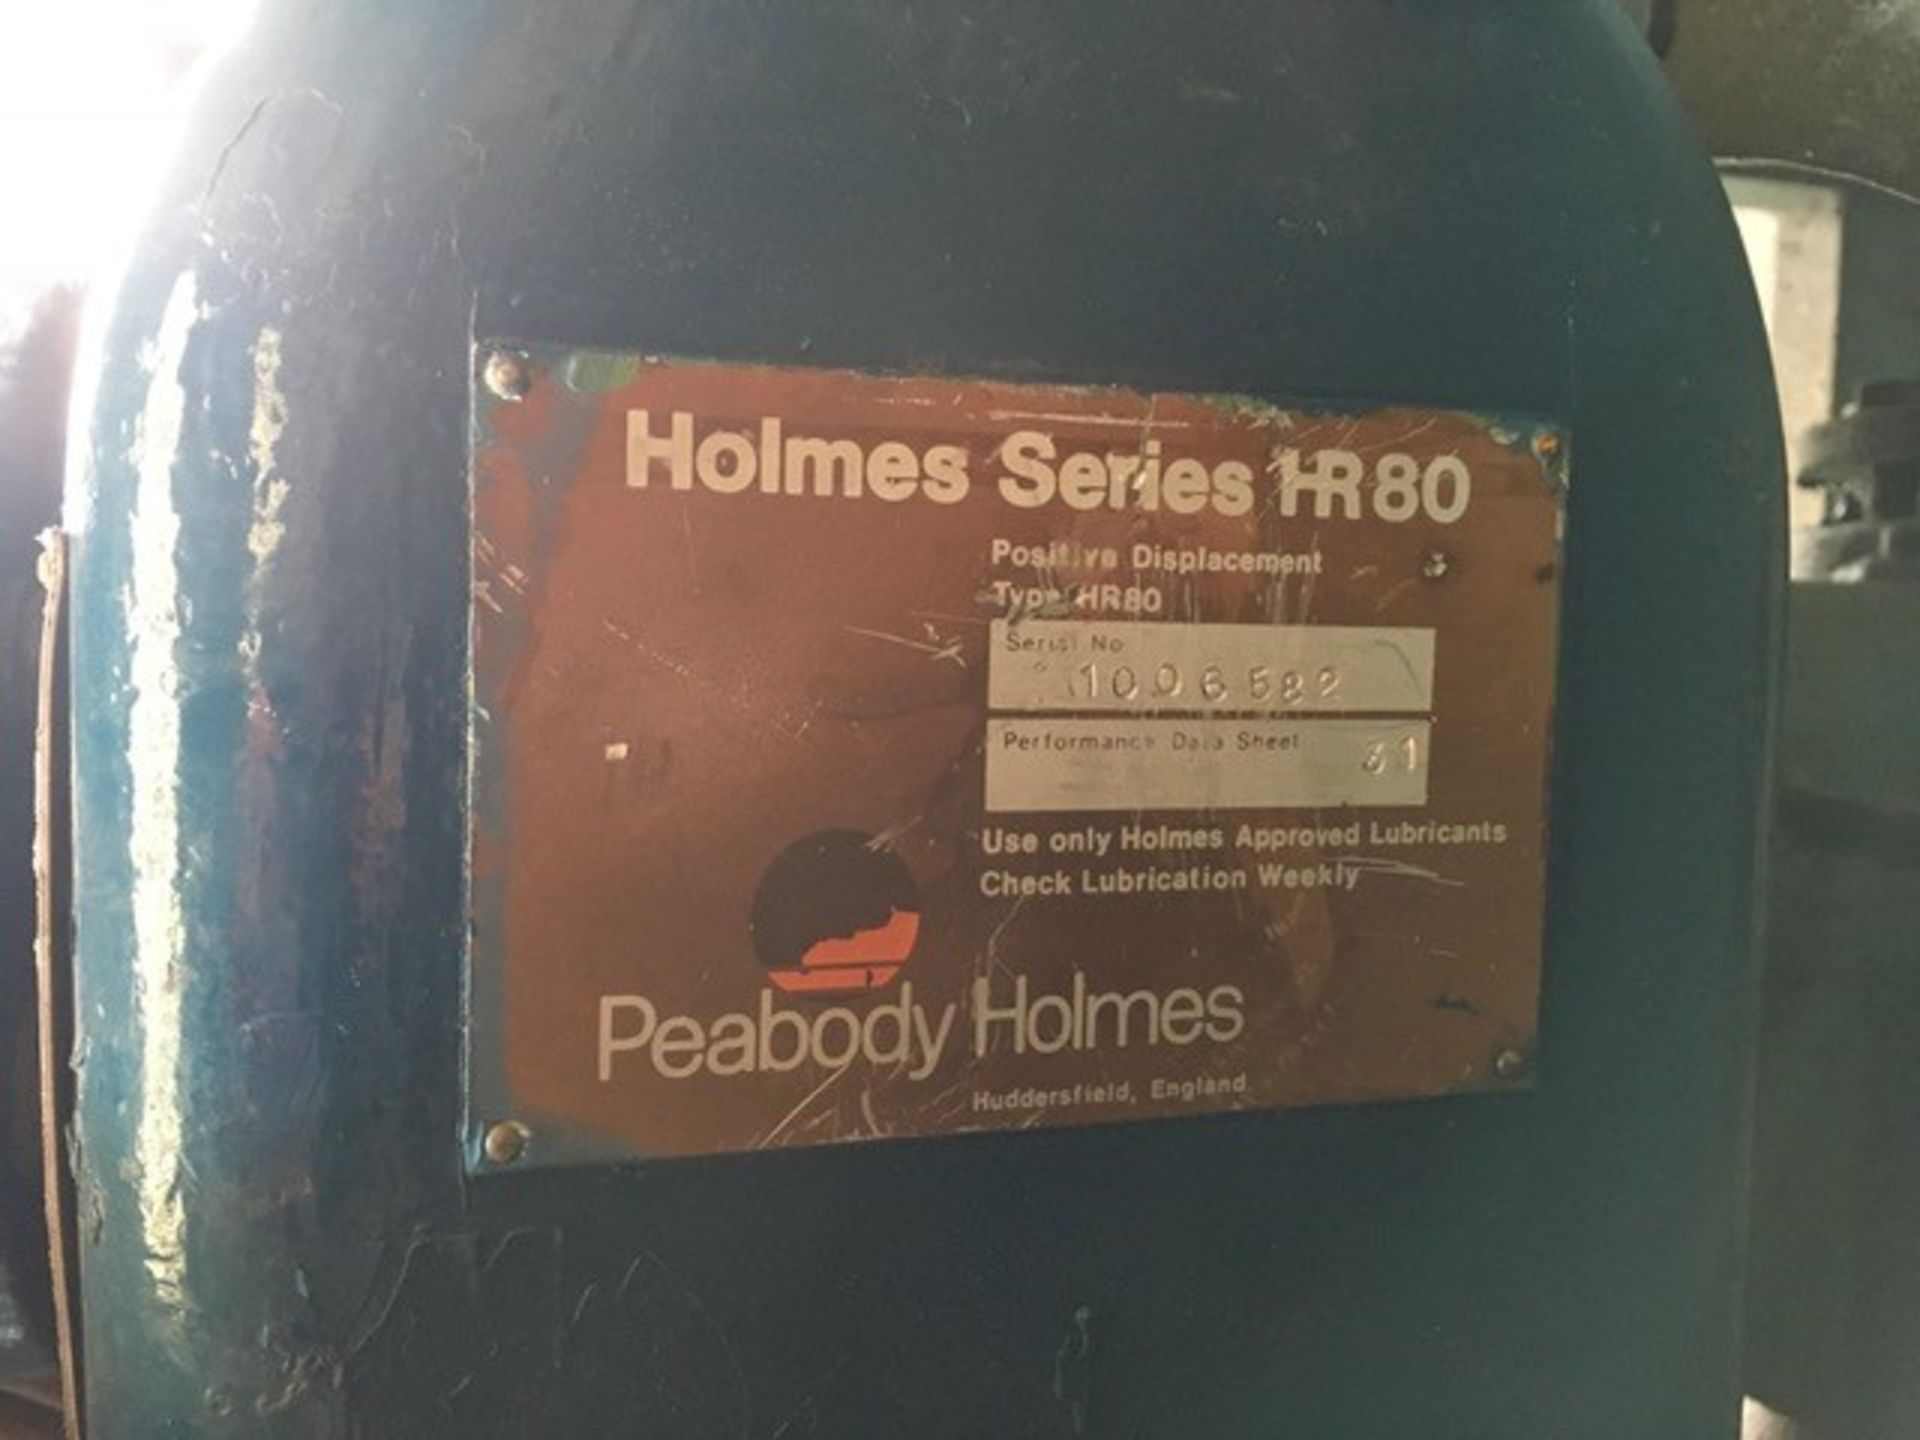 Peabody Holmes HR80 Displacement Blower - Image 5 of 6